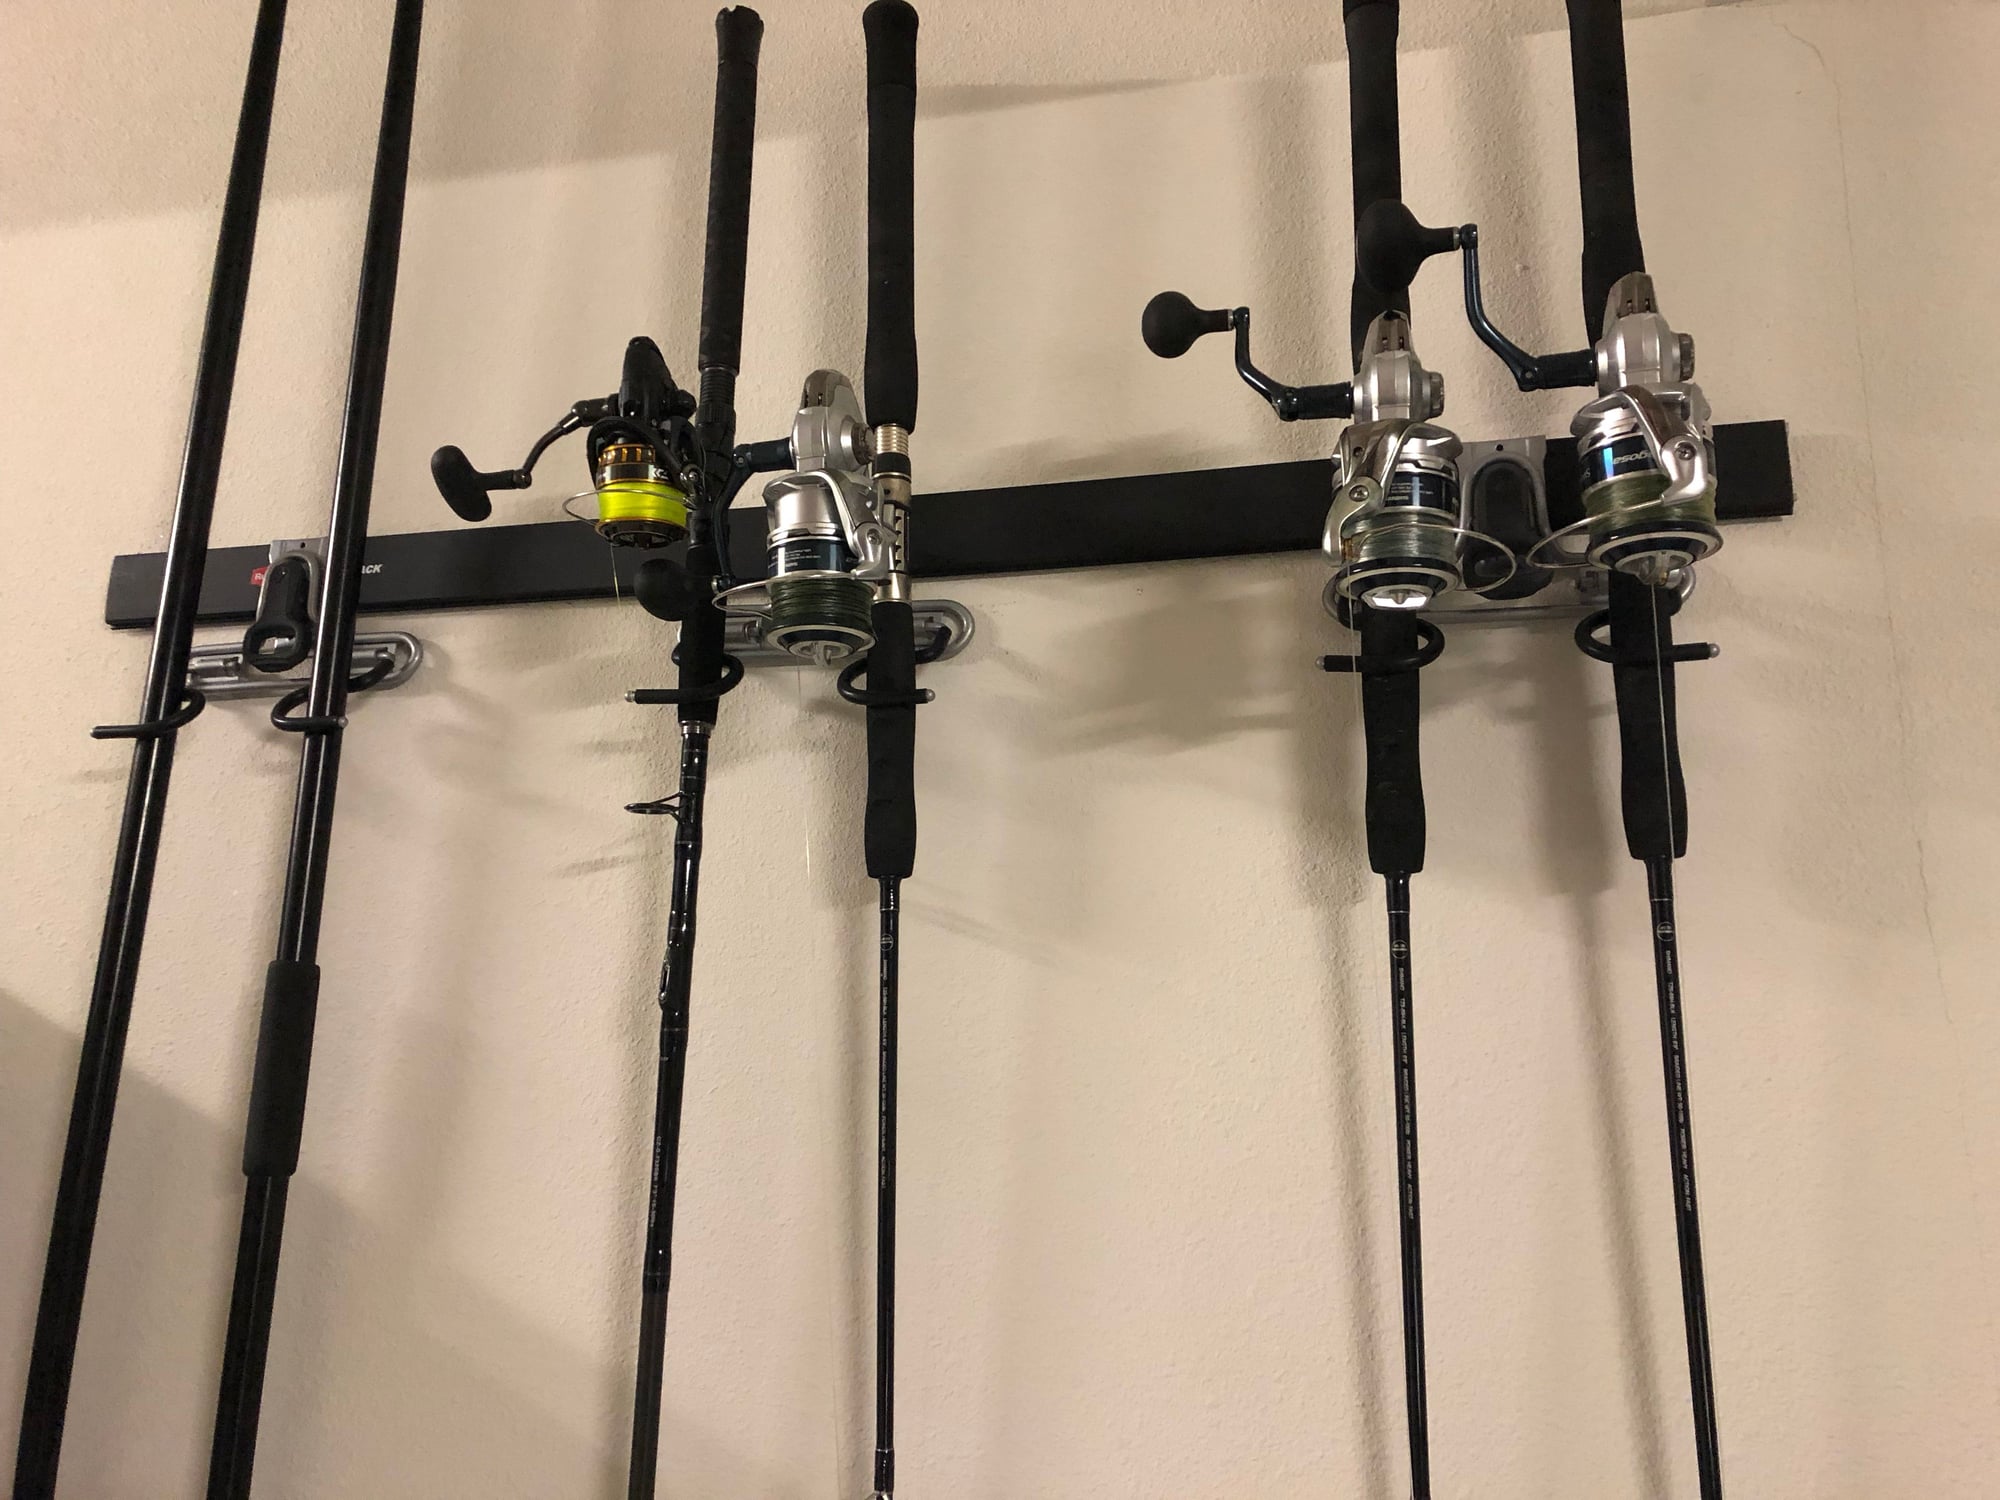 rod holder track - The Hull Truth - Boating and Fishing Forum